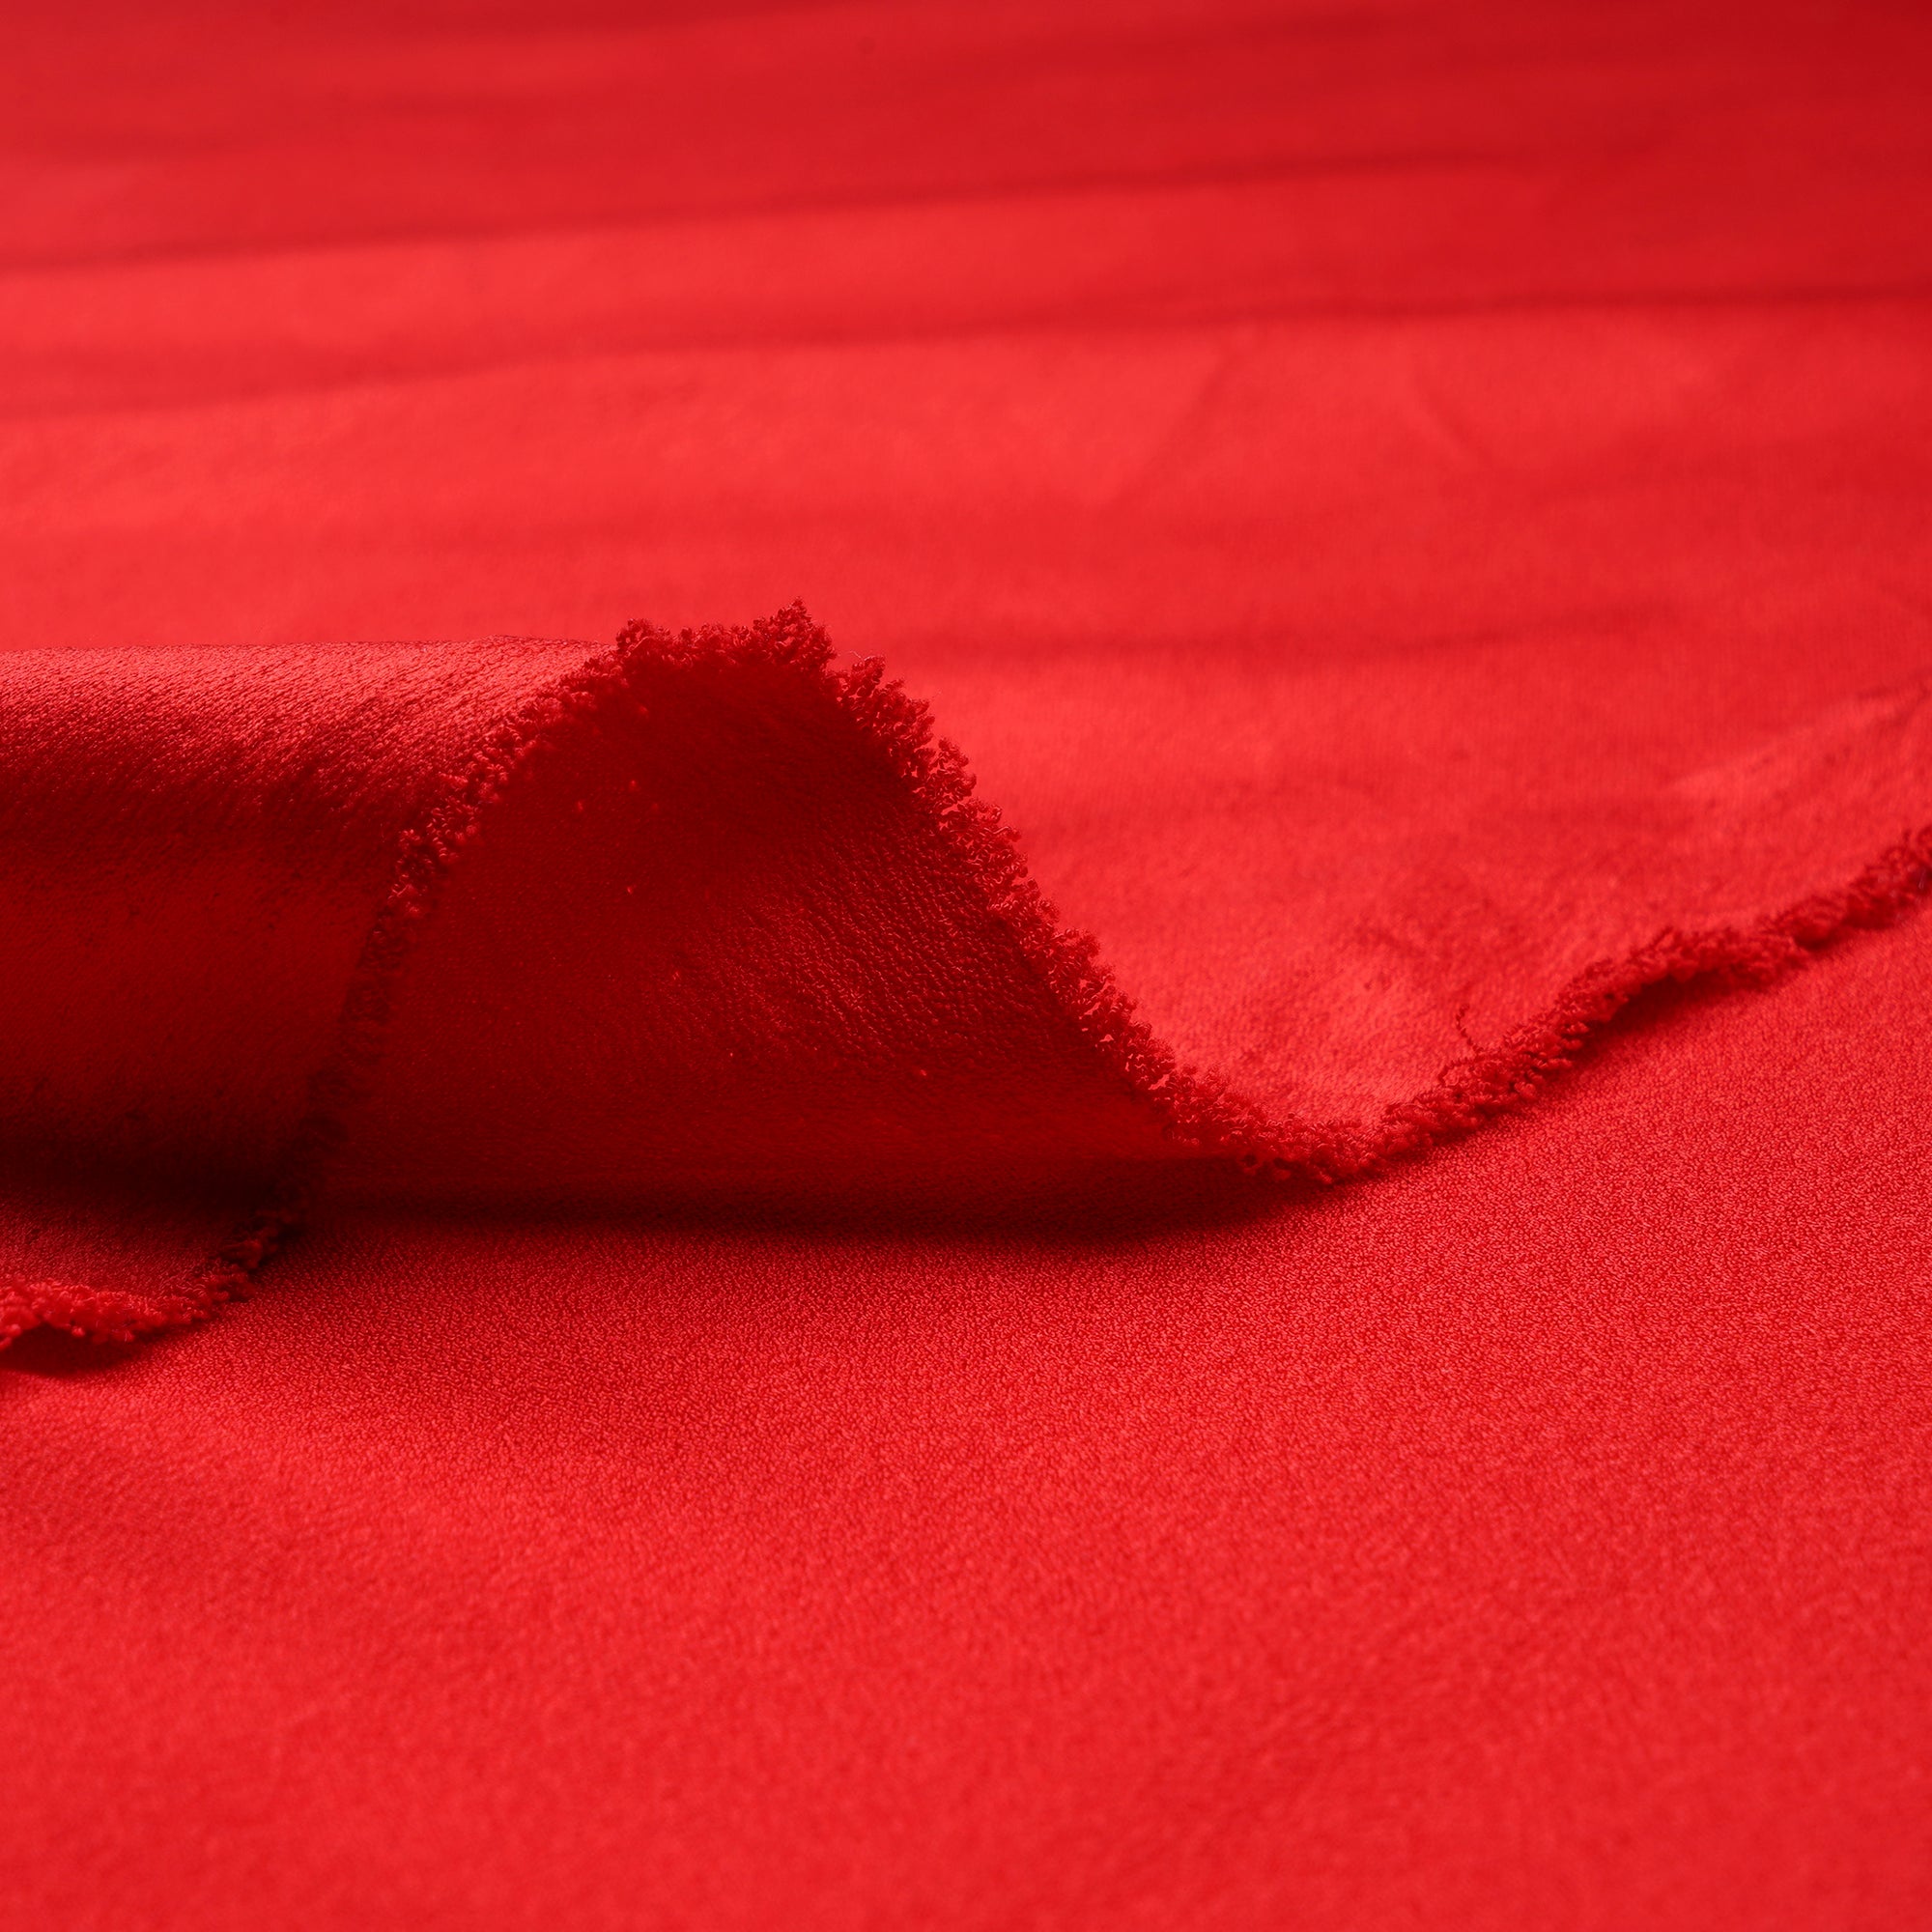 Red Solid Dyed Imported Versace Crepe Fabric (60" Width)